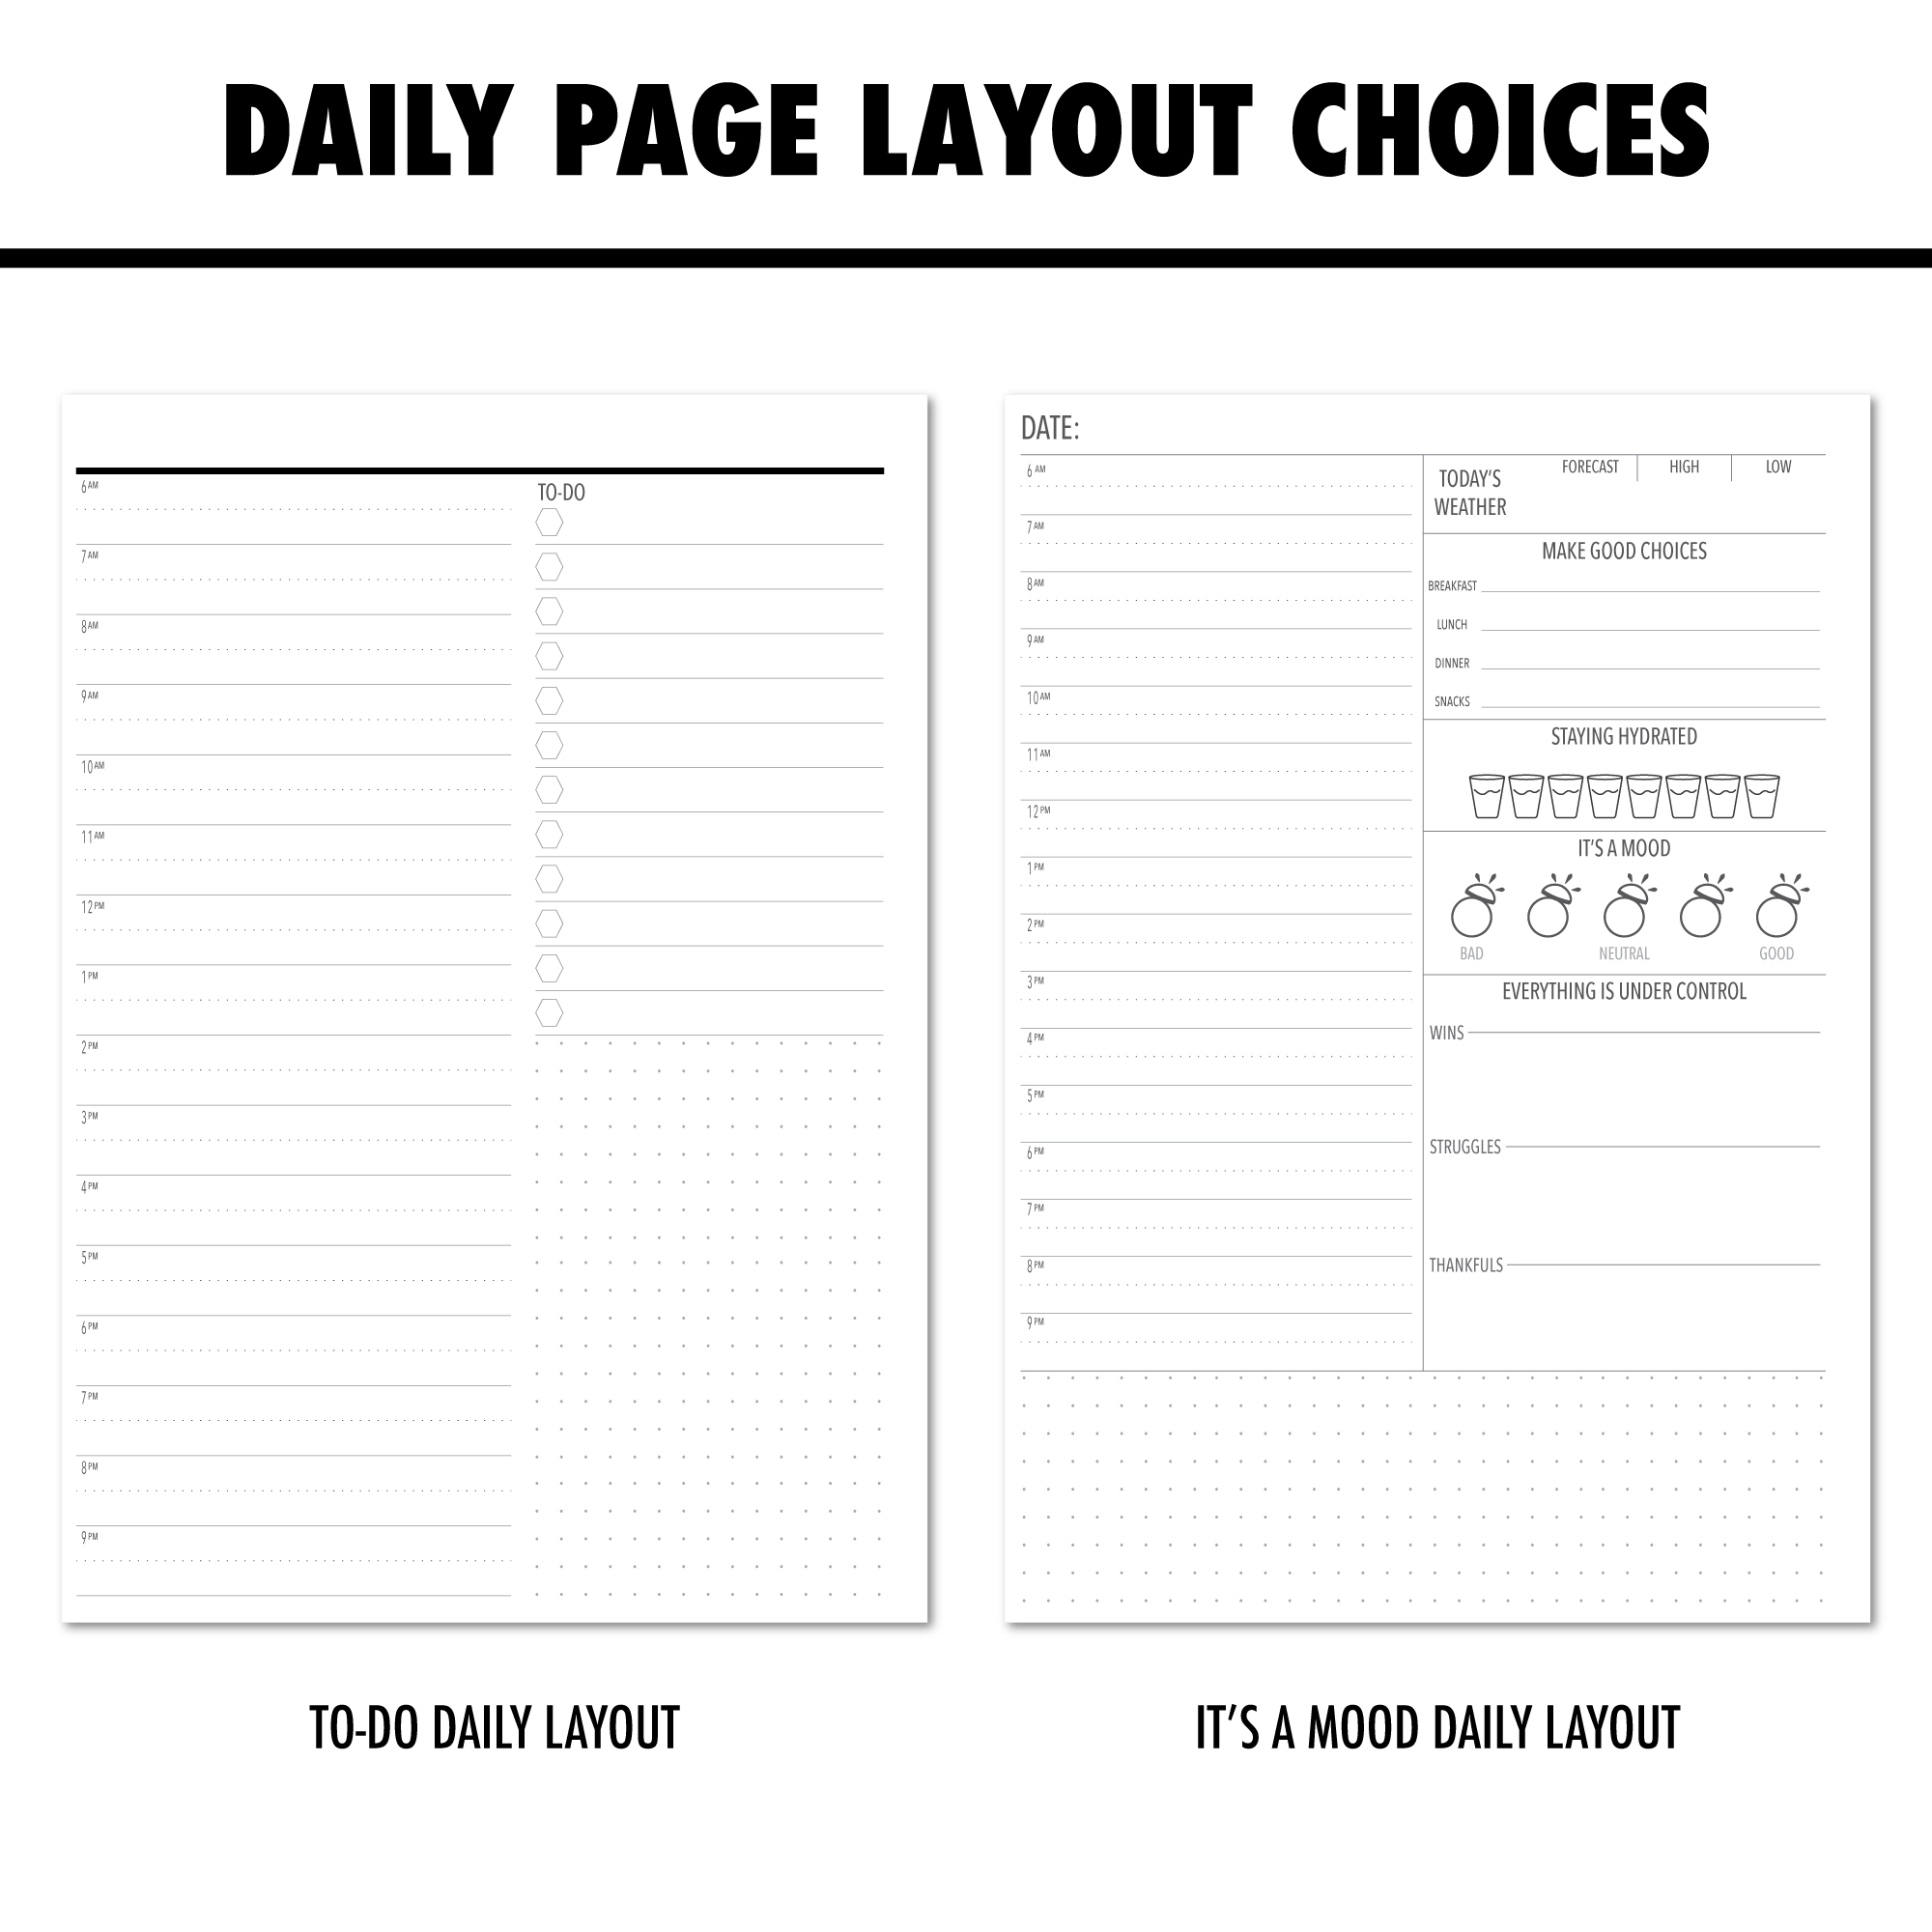 Daily Page Layouts